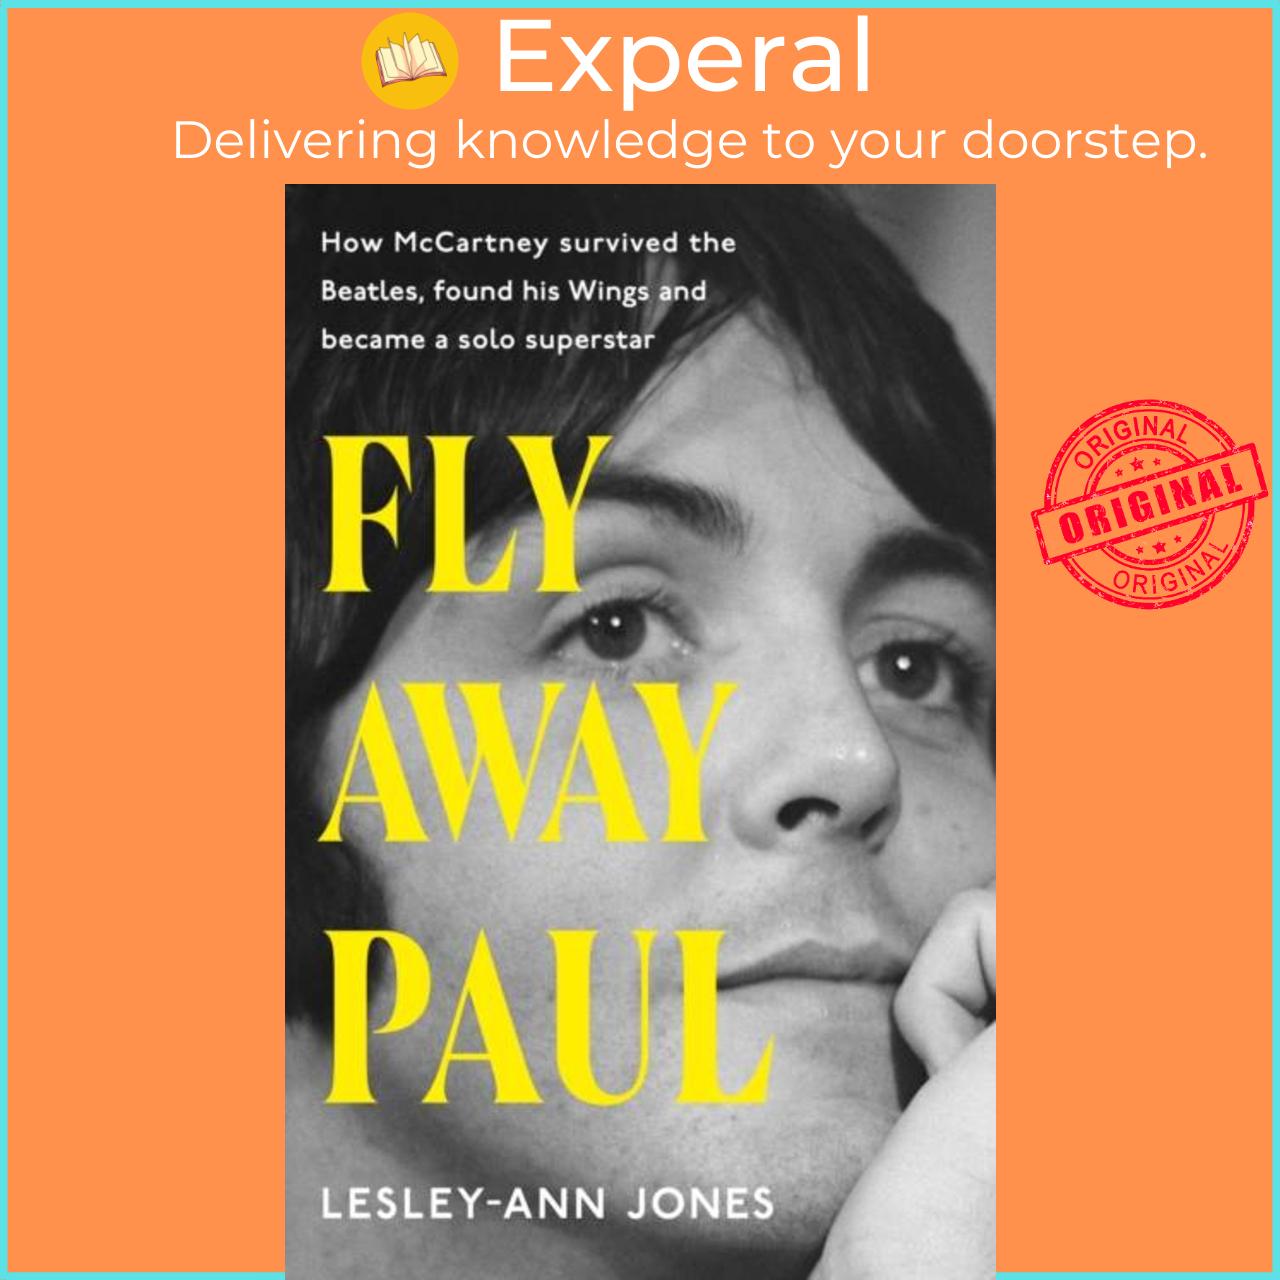 Sách - Fly Away Paul - The extraordinary story of how Paul McCartney survive by Lesley-Ann Jones (UK edition, paperback)